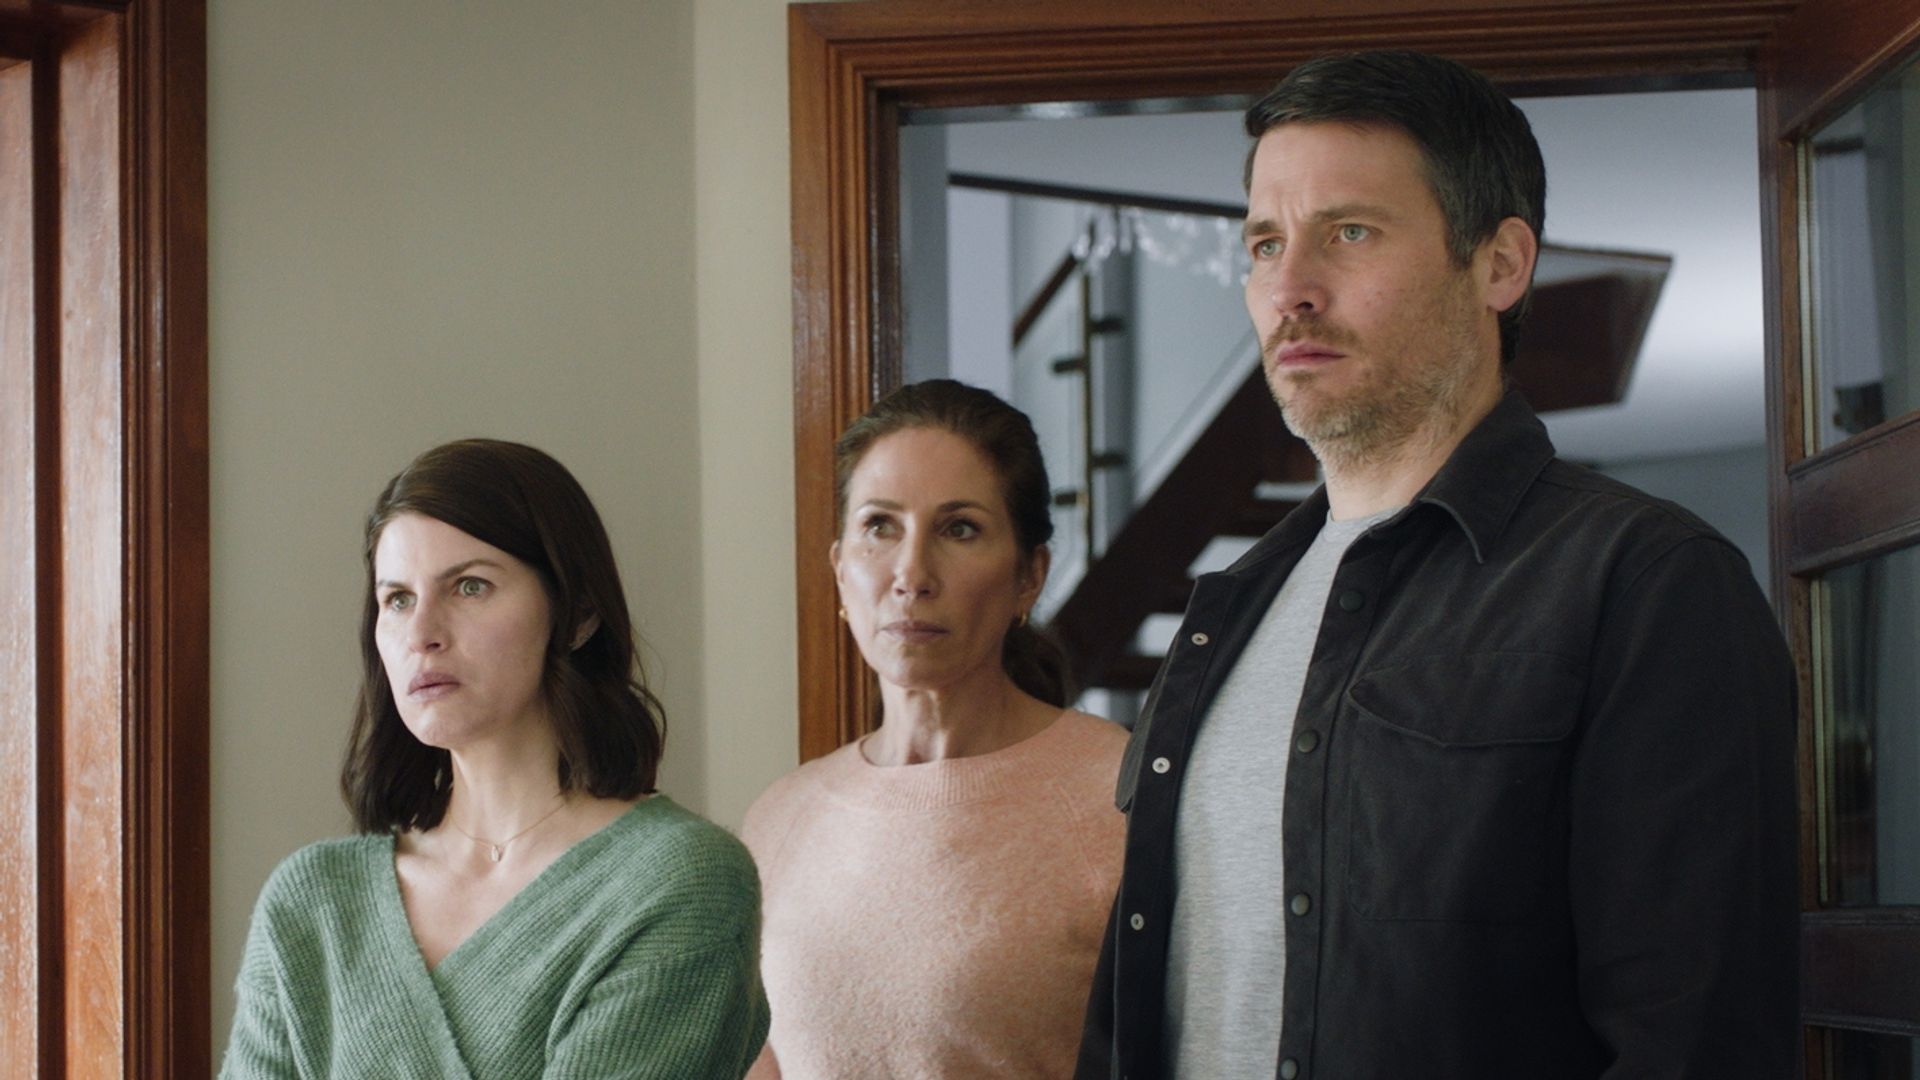 Jemima Rooper, Gaynor Faye and Robert James-Collier in The Inheritance